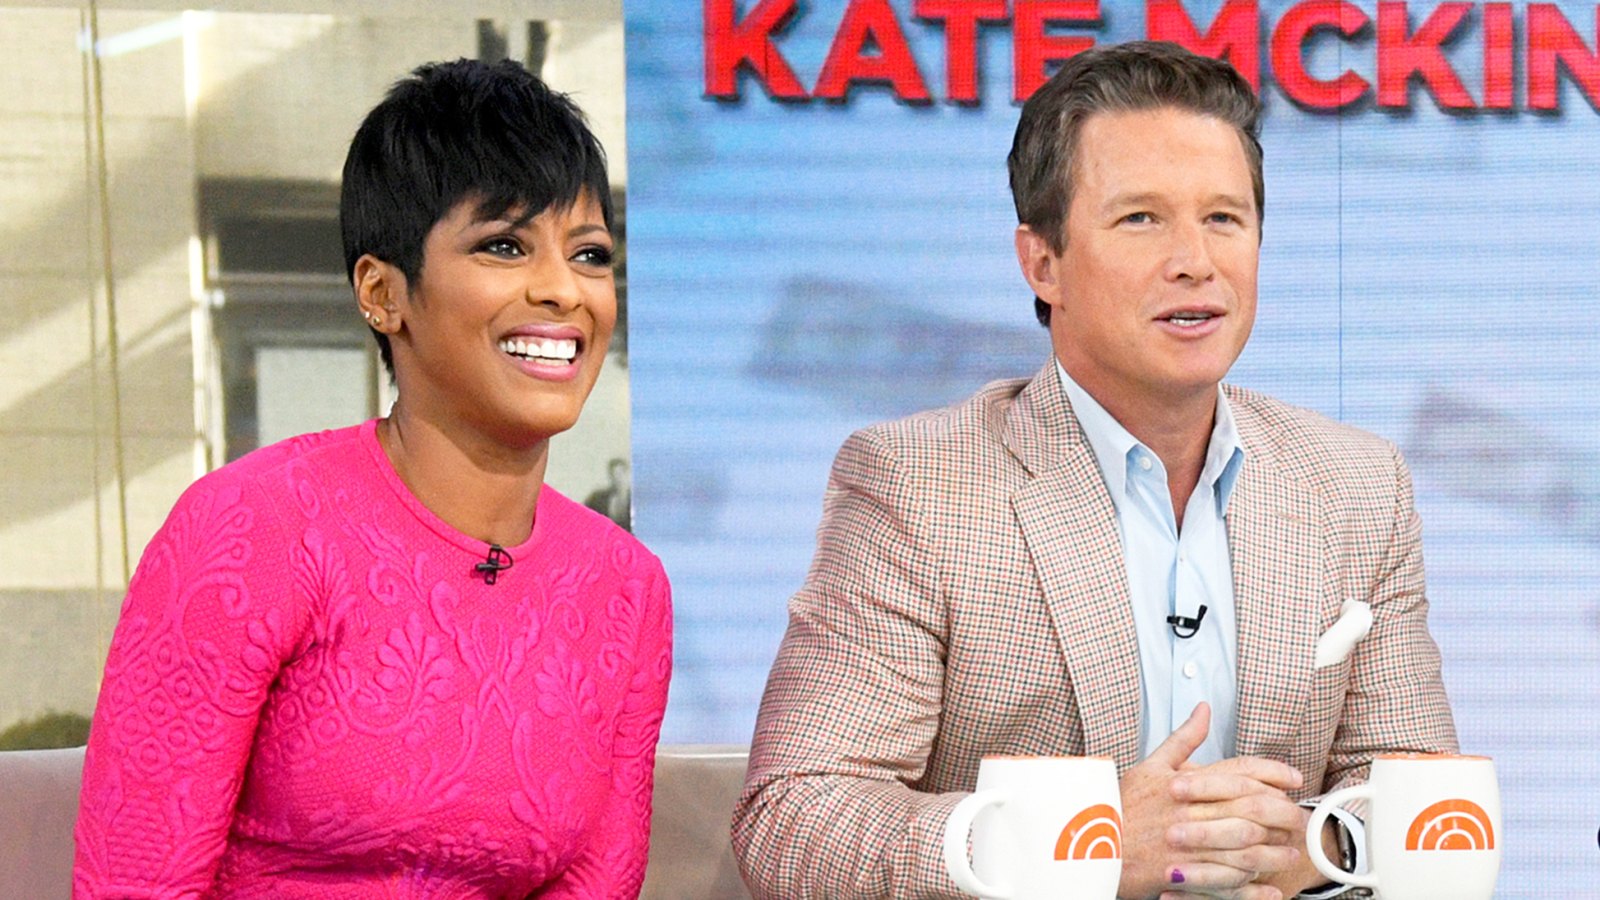 Tamron Hall and Billy Bush on ‘Today‘ show